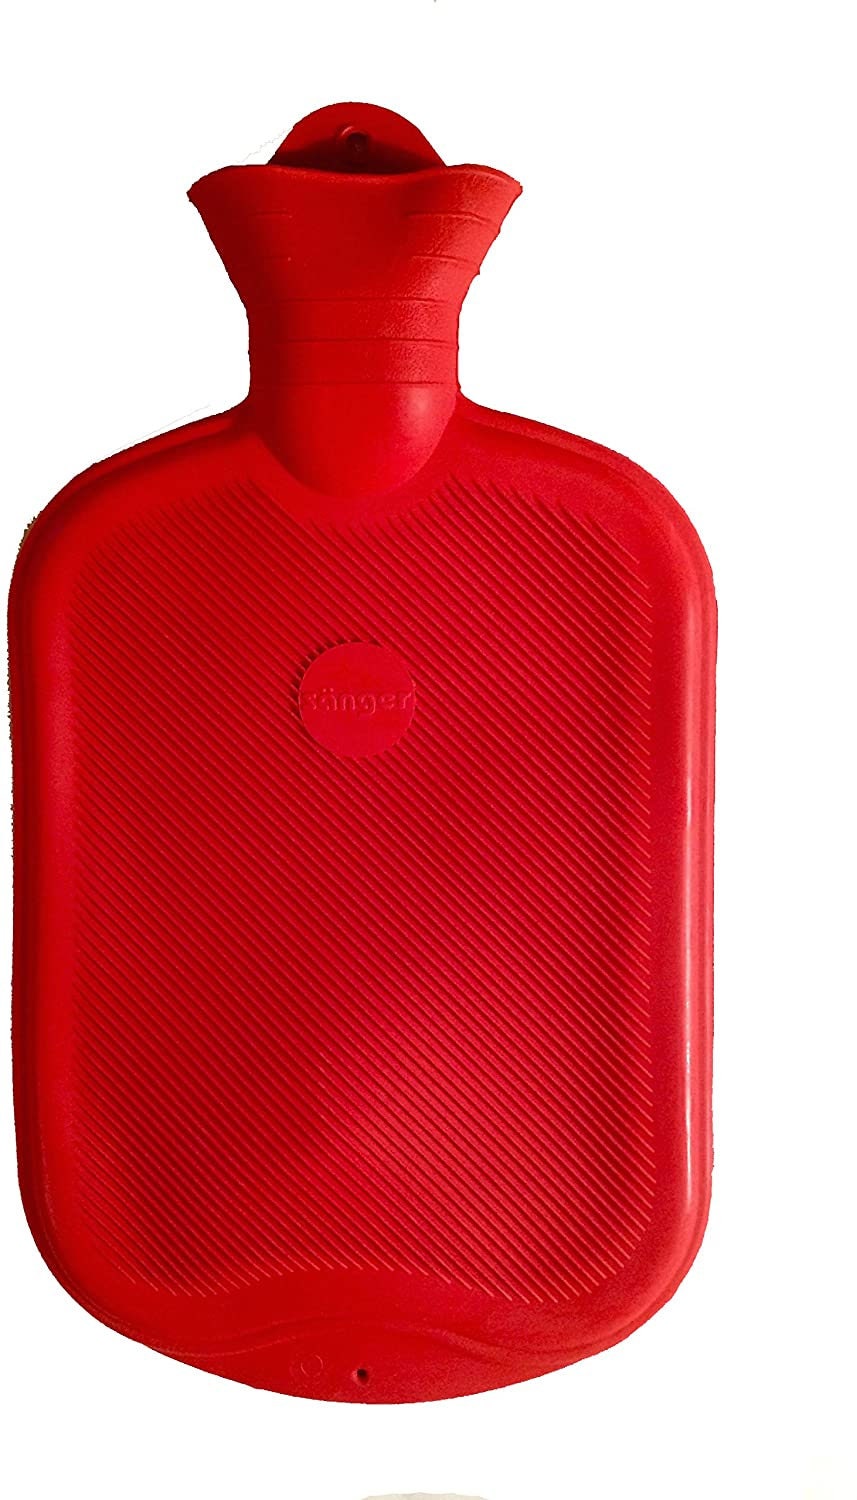 Sänger Rubber Hot Water Bottle Made in Germany 2 Litres red -  Israel